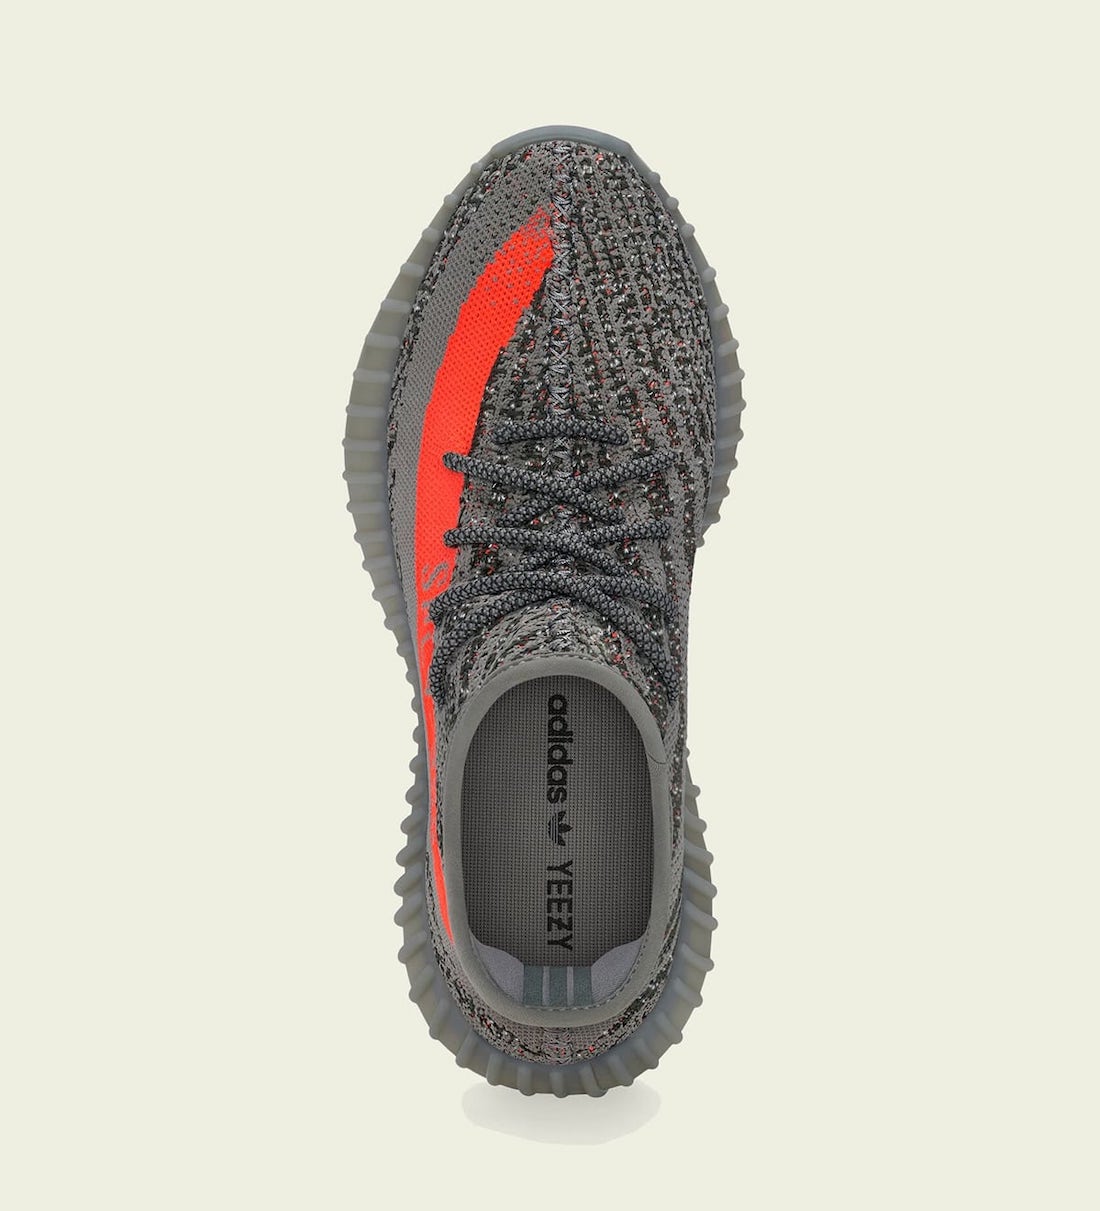 adidas-Yeezy-Boost-350-V2-Beluga-Reflective-GW1229-Release-Date-Price-3